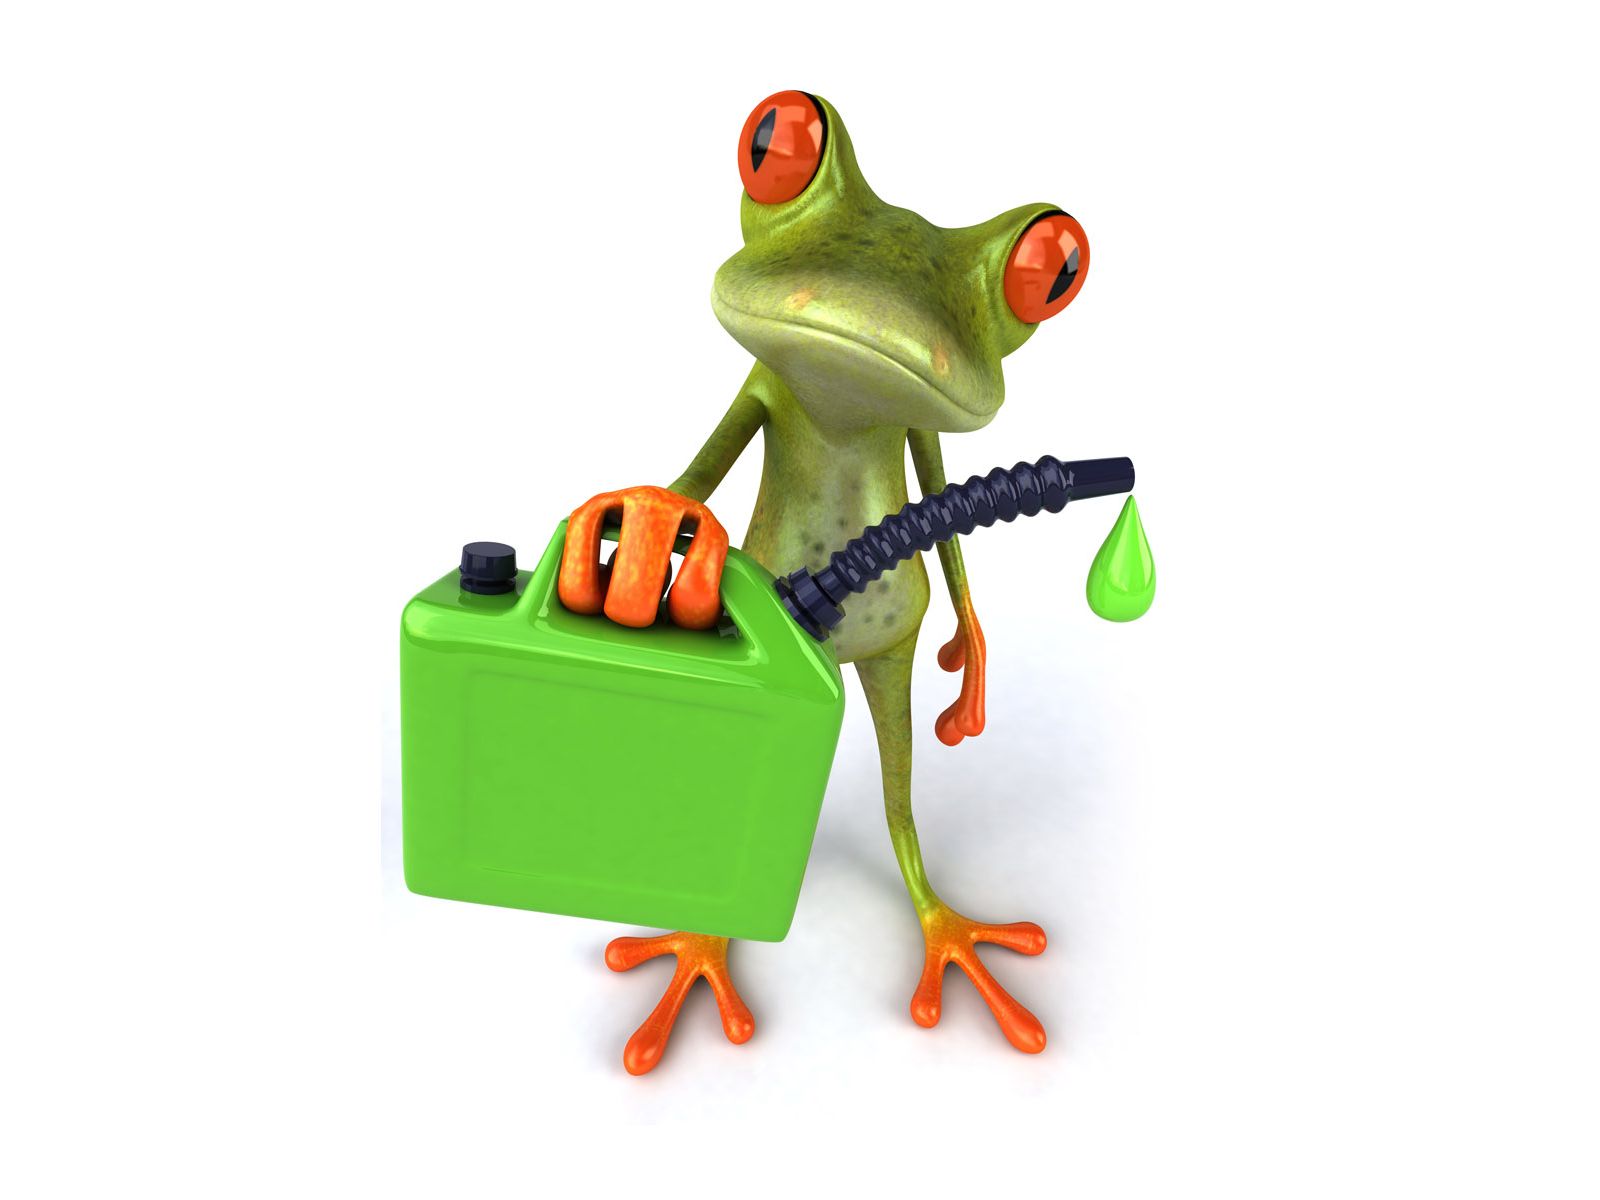 Download full size Frog and a fuel canister 3D Animals wallpaper / 1600x1200